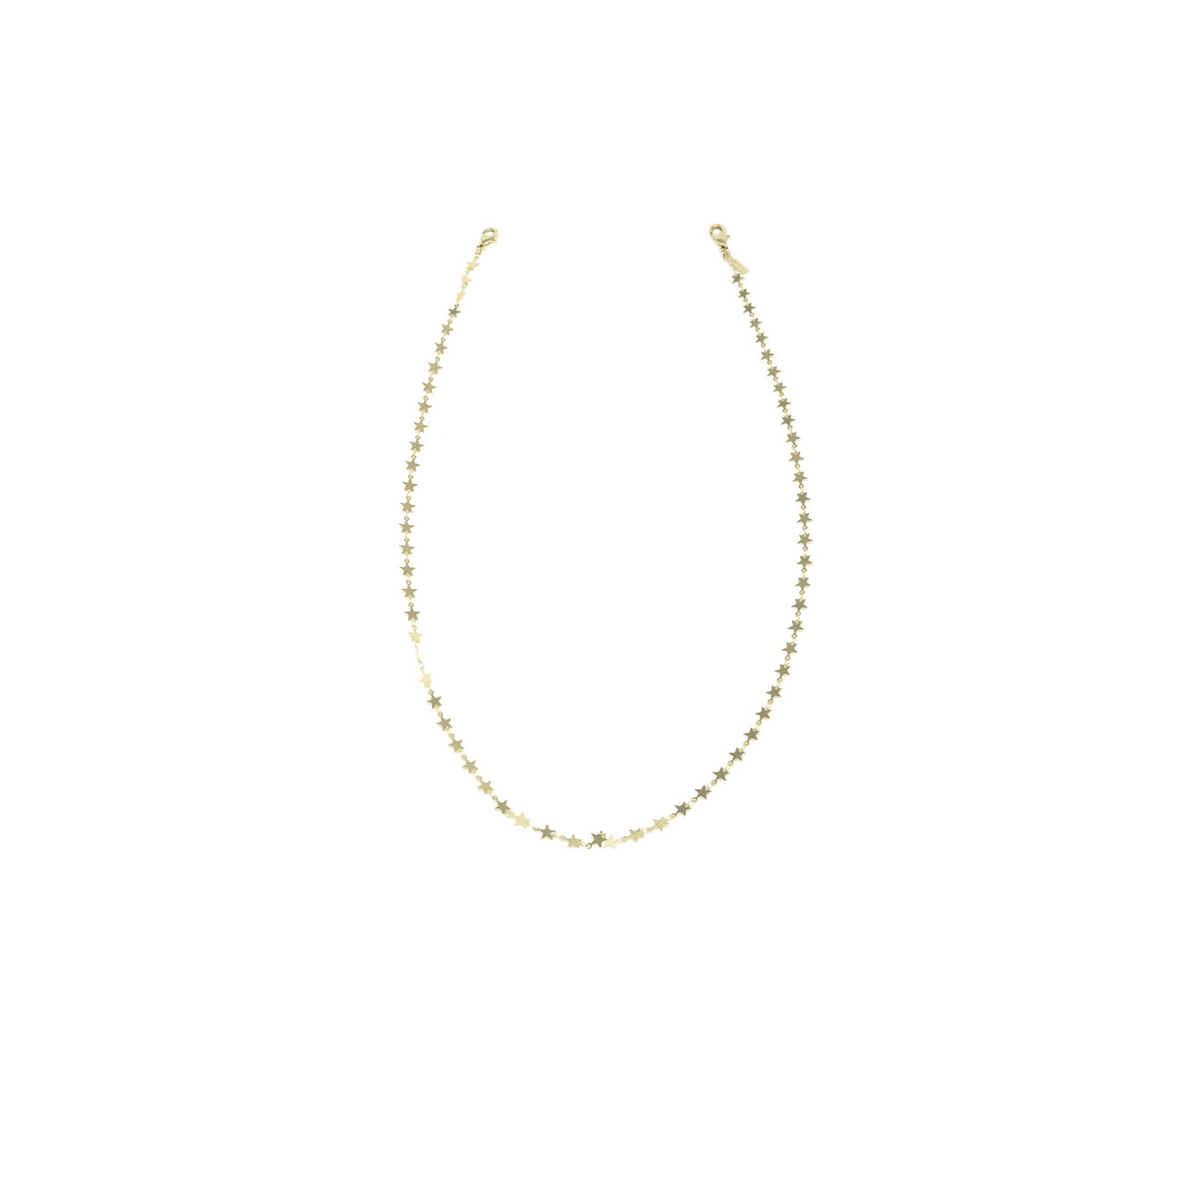 Huma® Accessories: Star Chain color Gold L04 - product thumbnail 3/3.